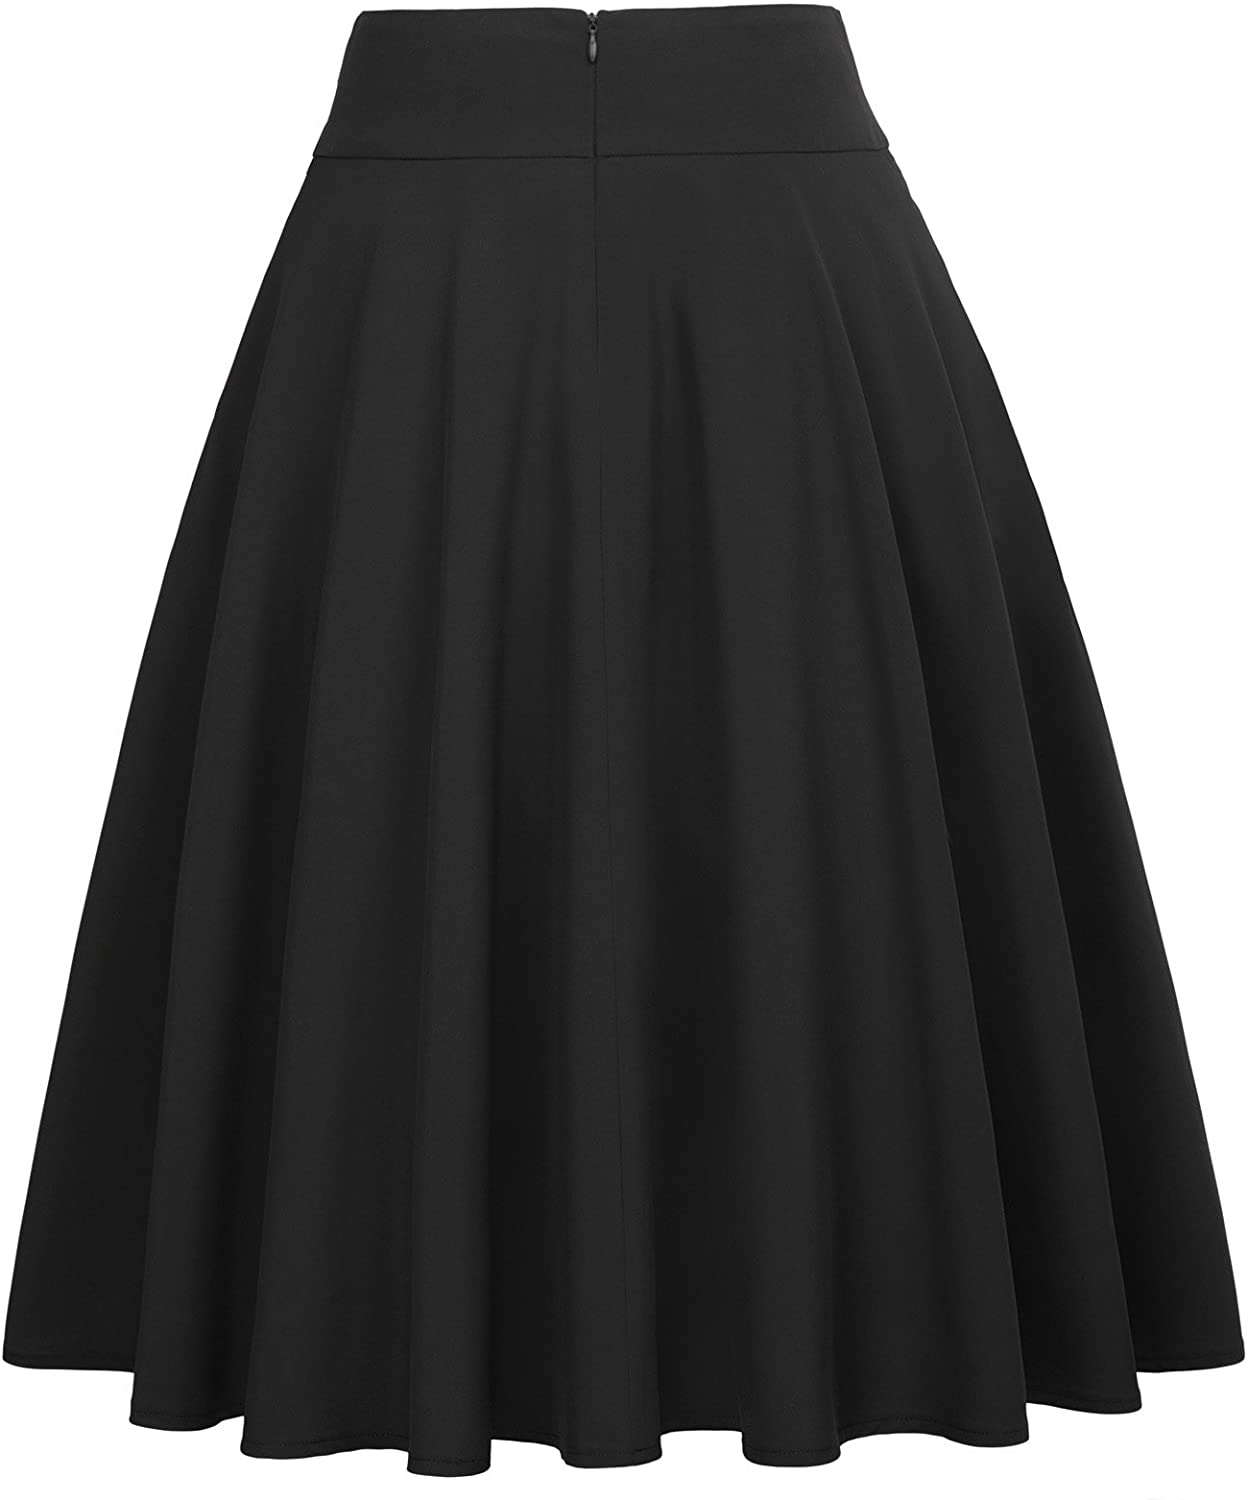 Classic Simplicity A-Line Midi Skirt in Blue - Retro, Indie and